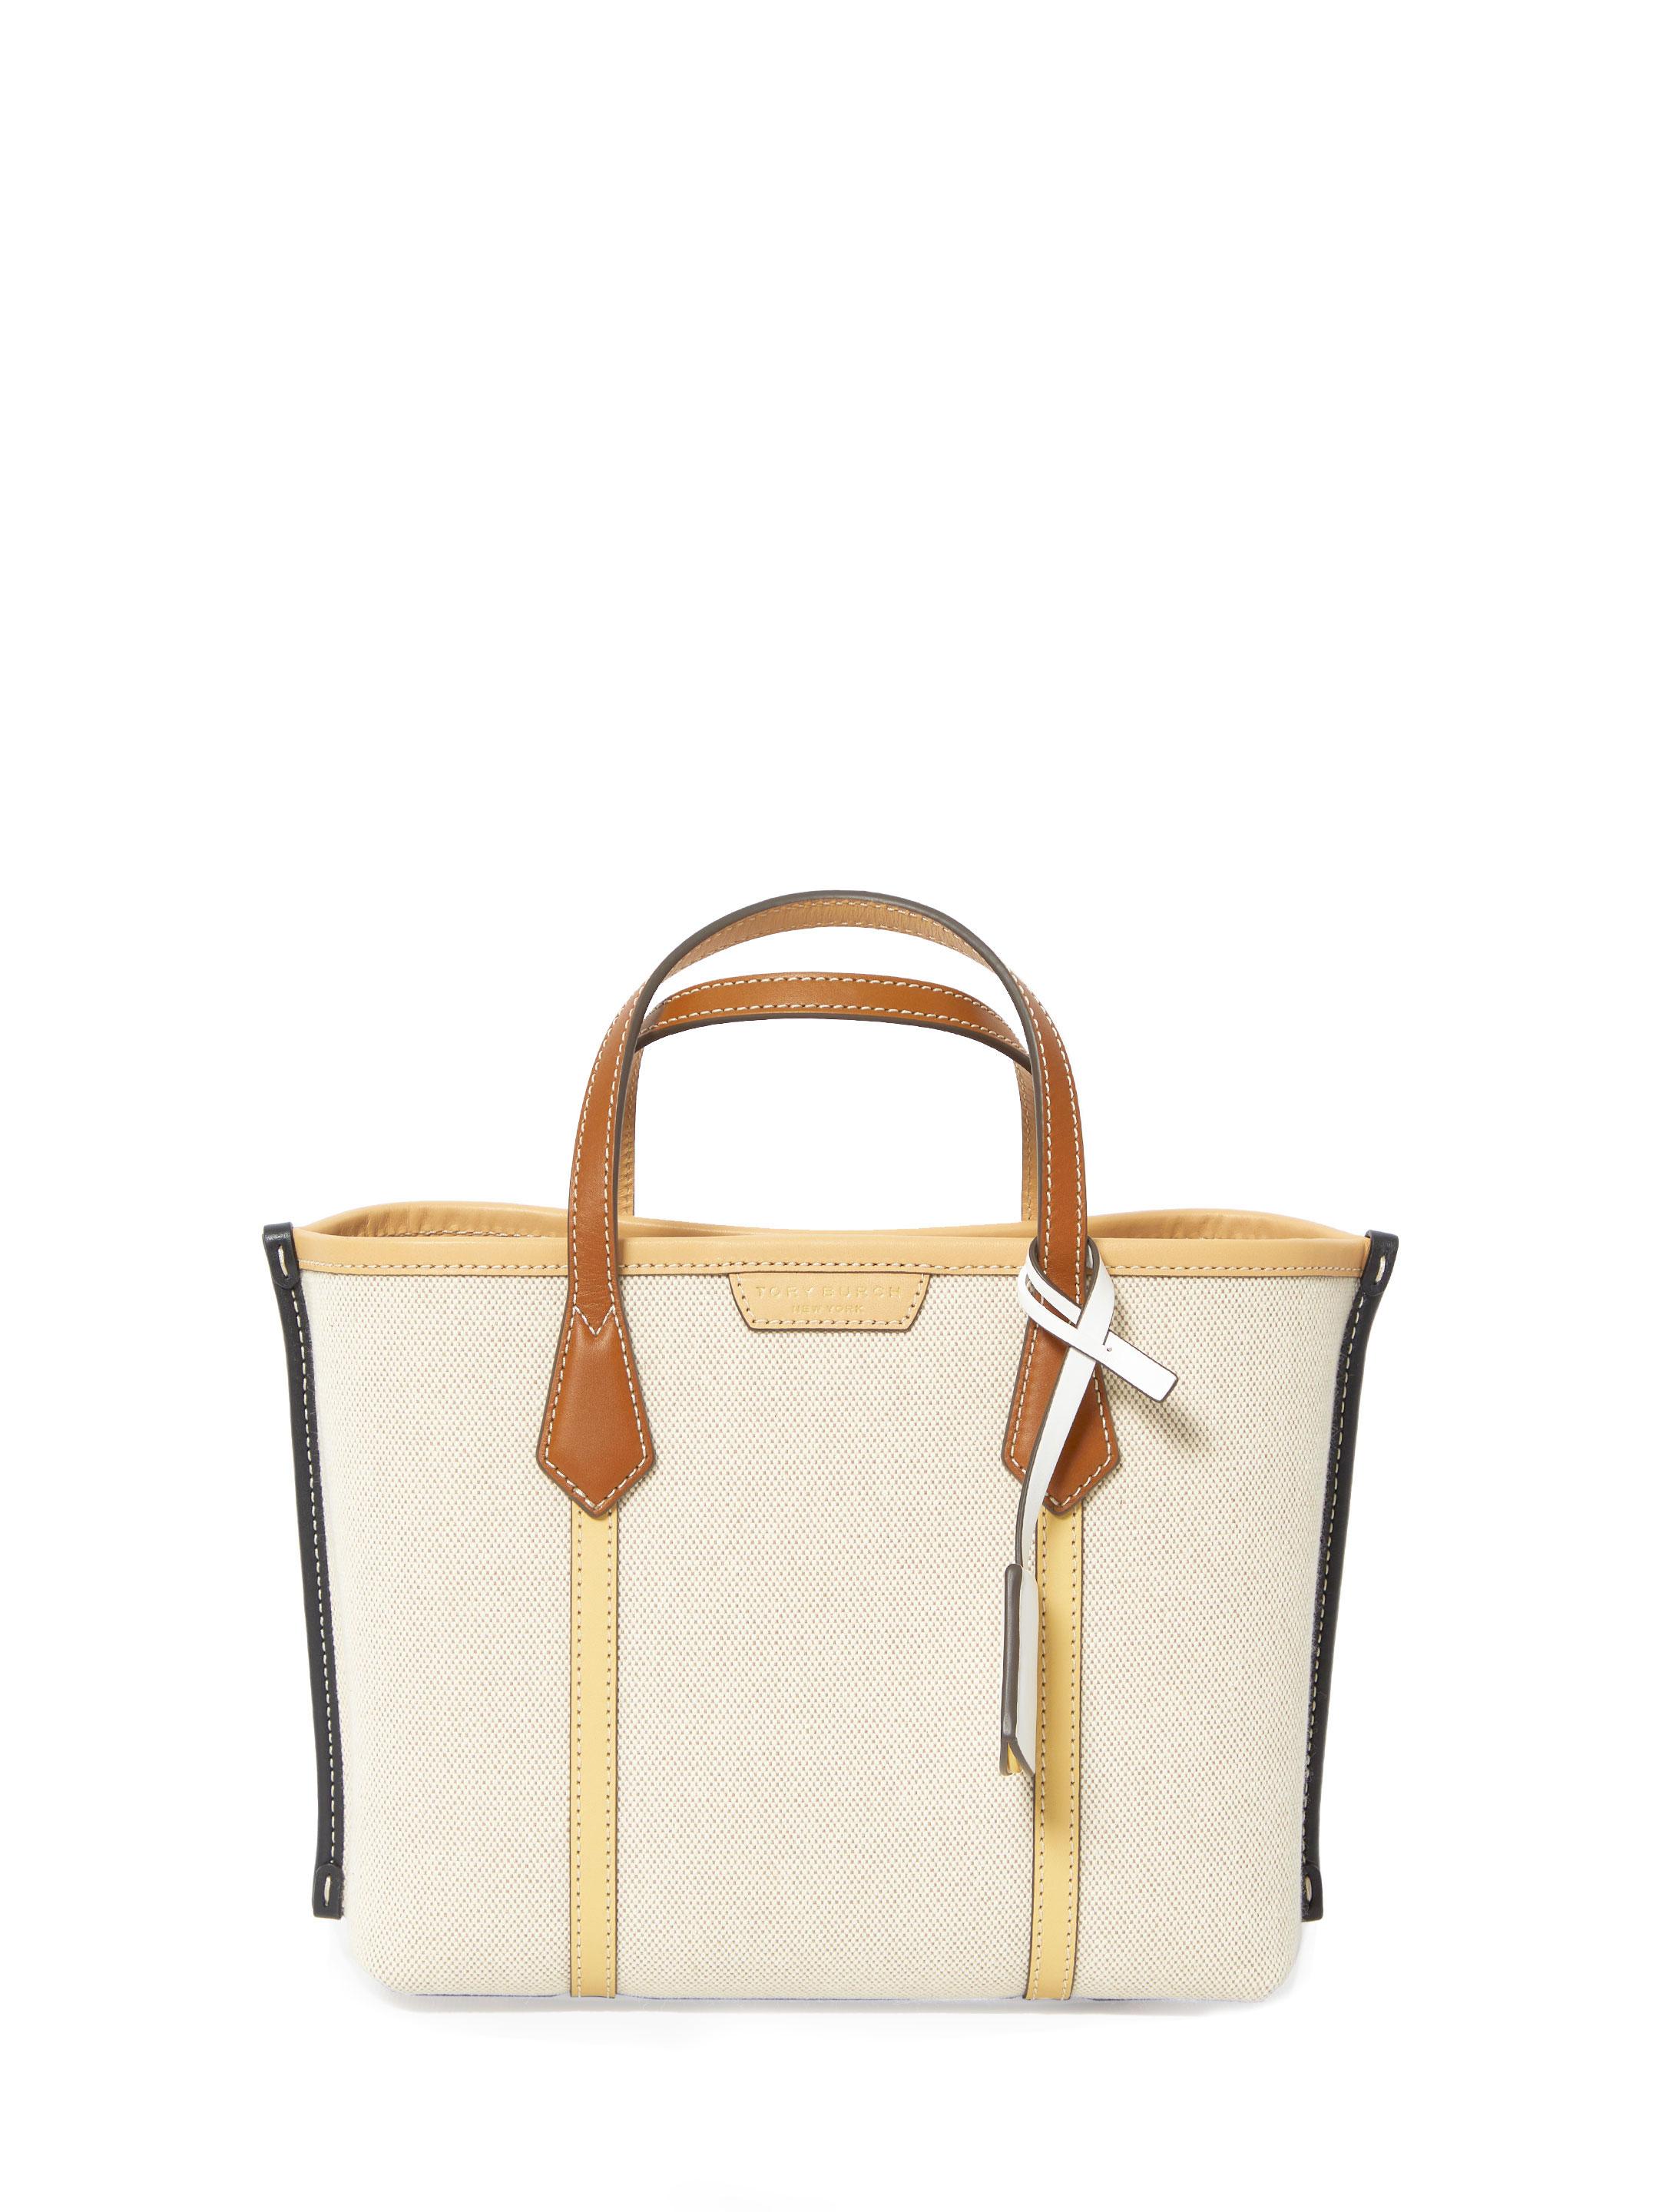 Tory Burch Small Perry Canvas Tote Bag in Natural | Lyst UK